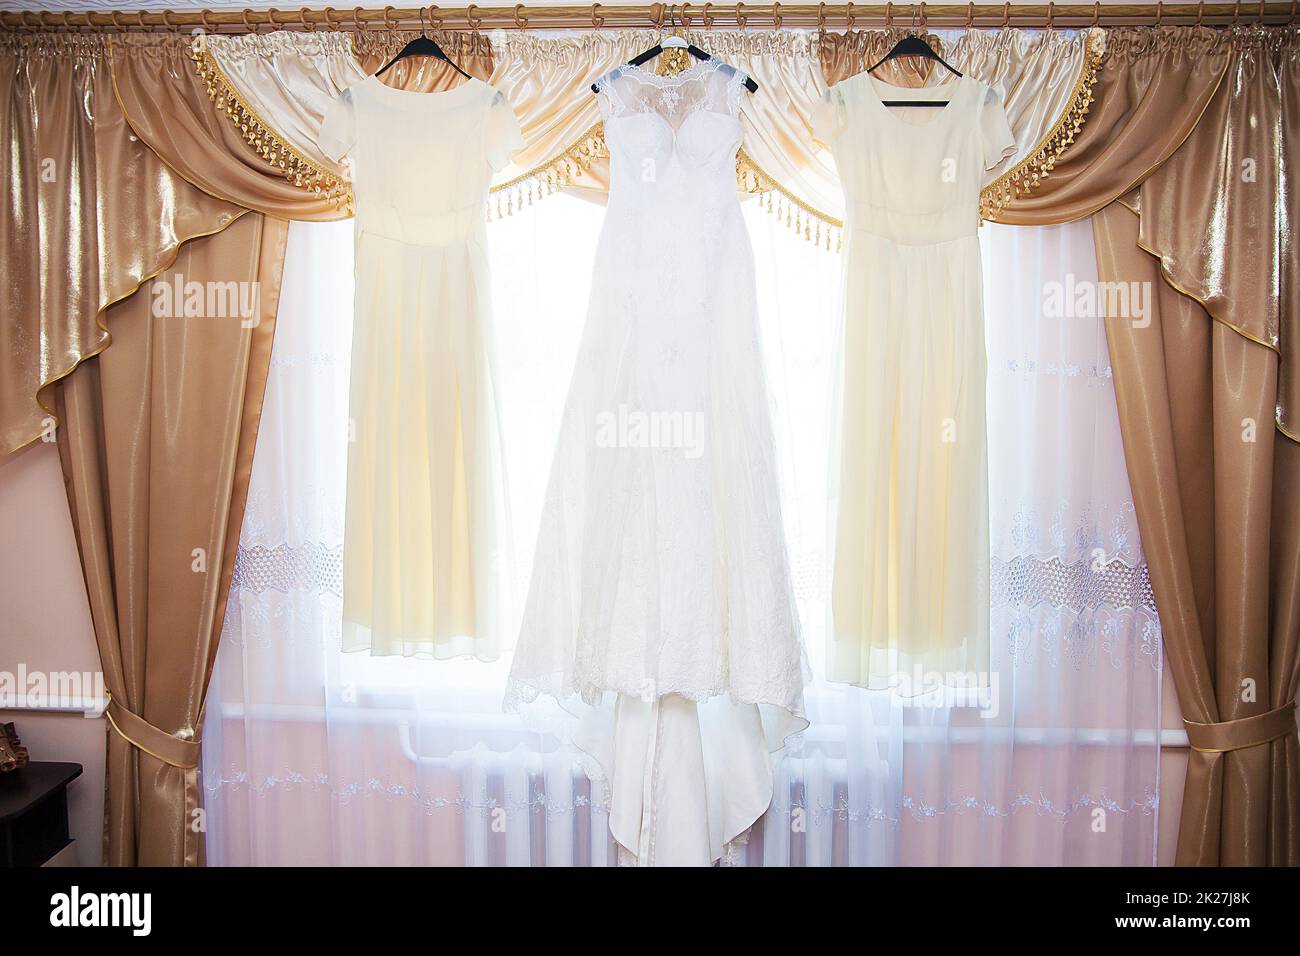 bride and bridesmaids dresses hanging on hangers Stock Photo